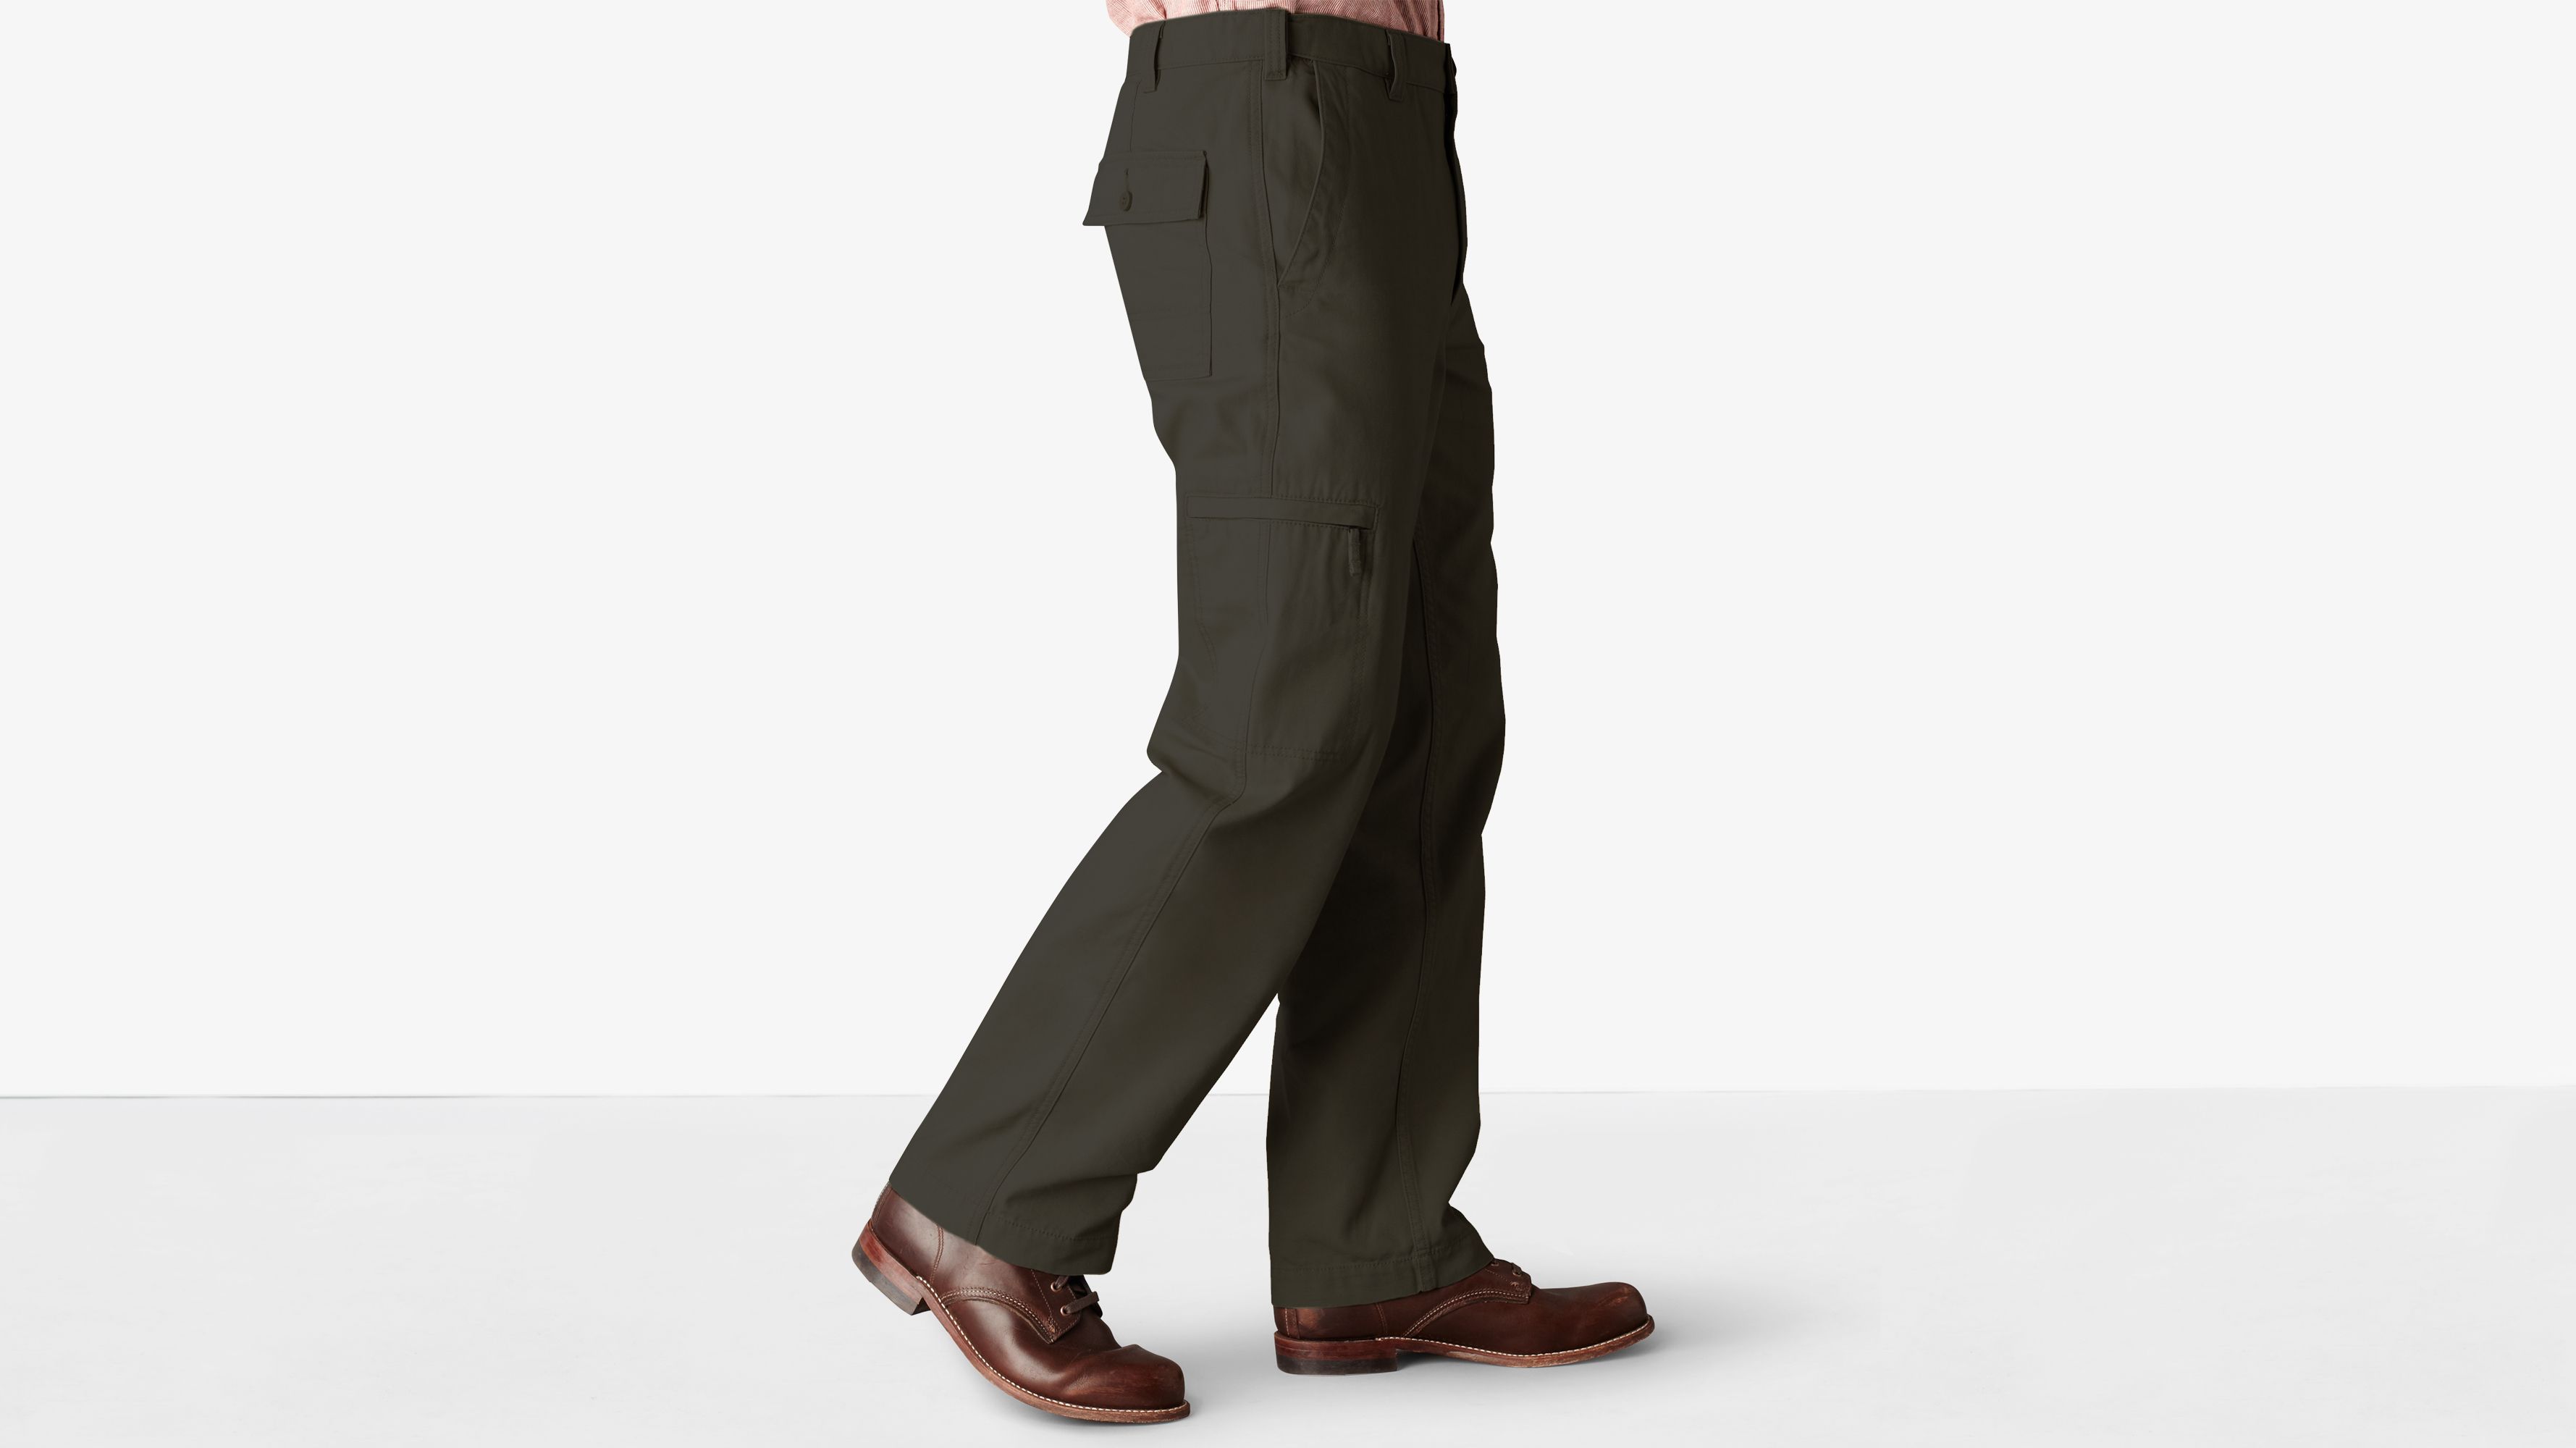 dockers big and tall cargo pants